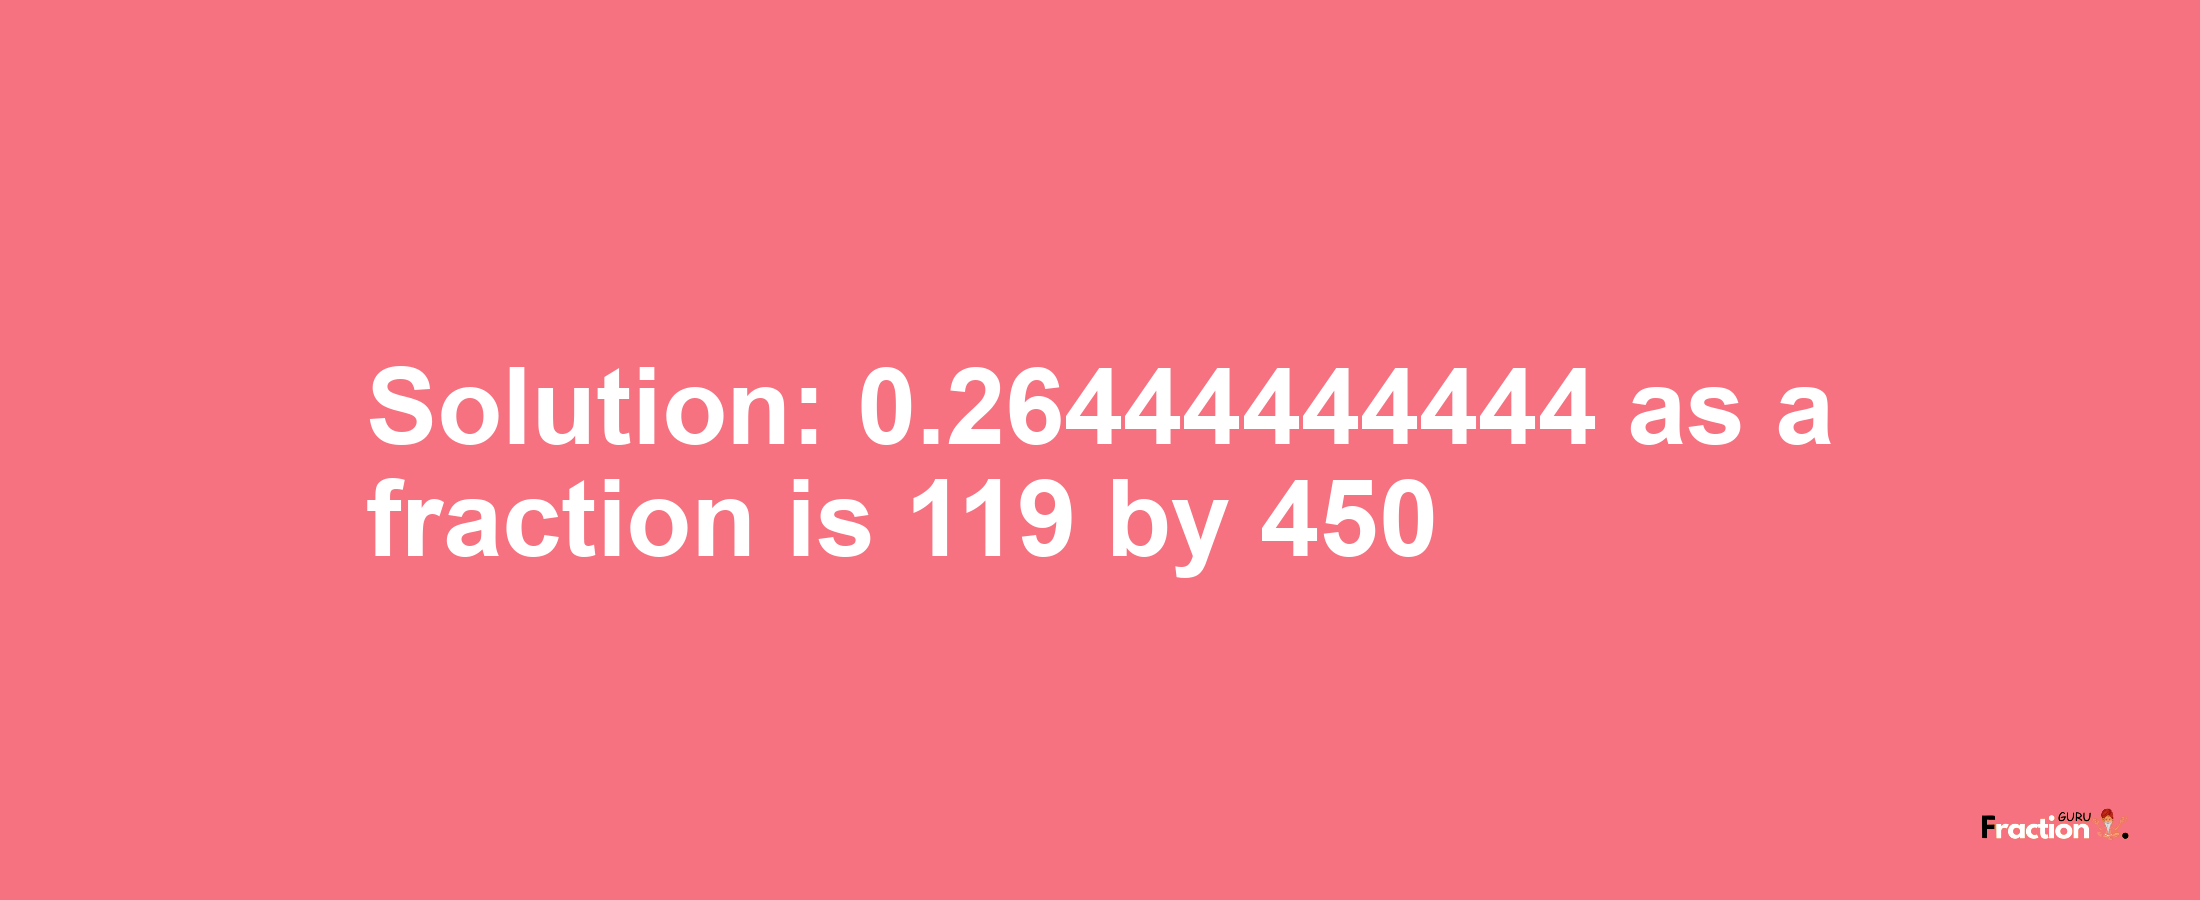 Solution:0.26444444444 as a fraction is 119/450